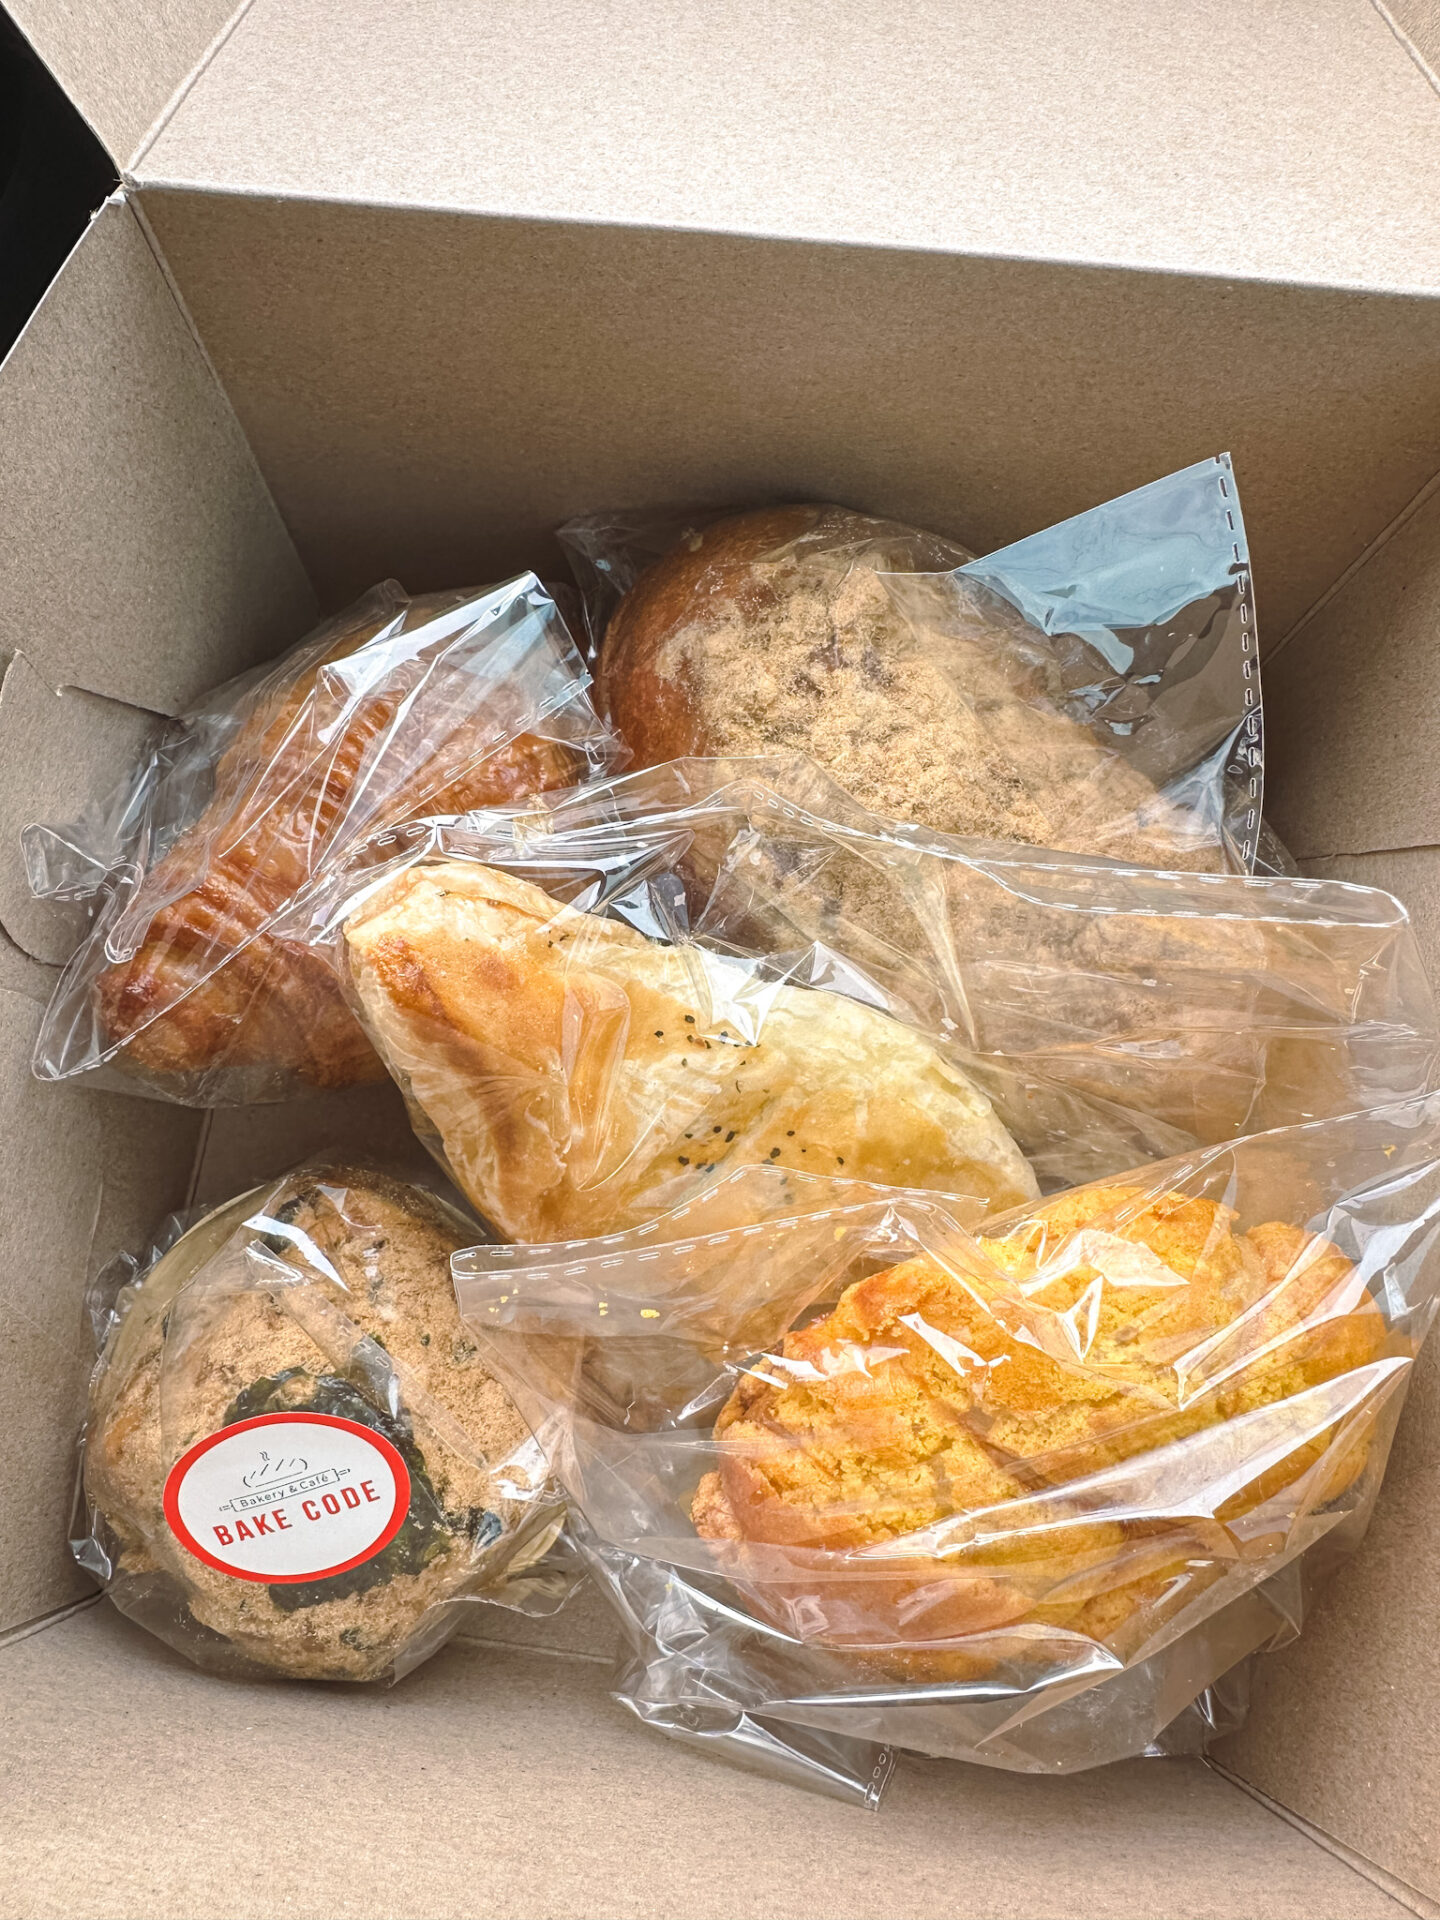 Pastries from Bake Code in Markham, Ontario